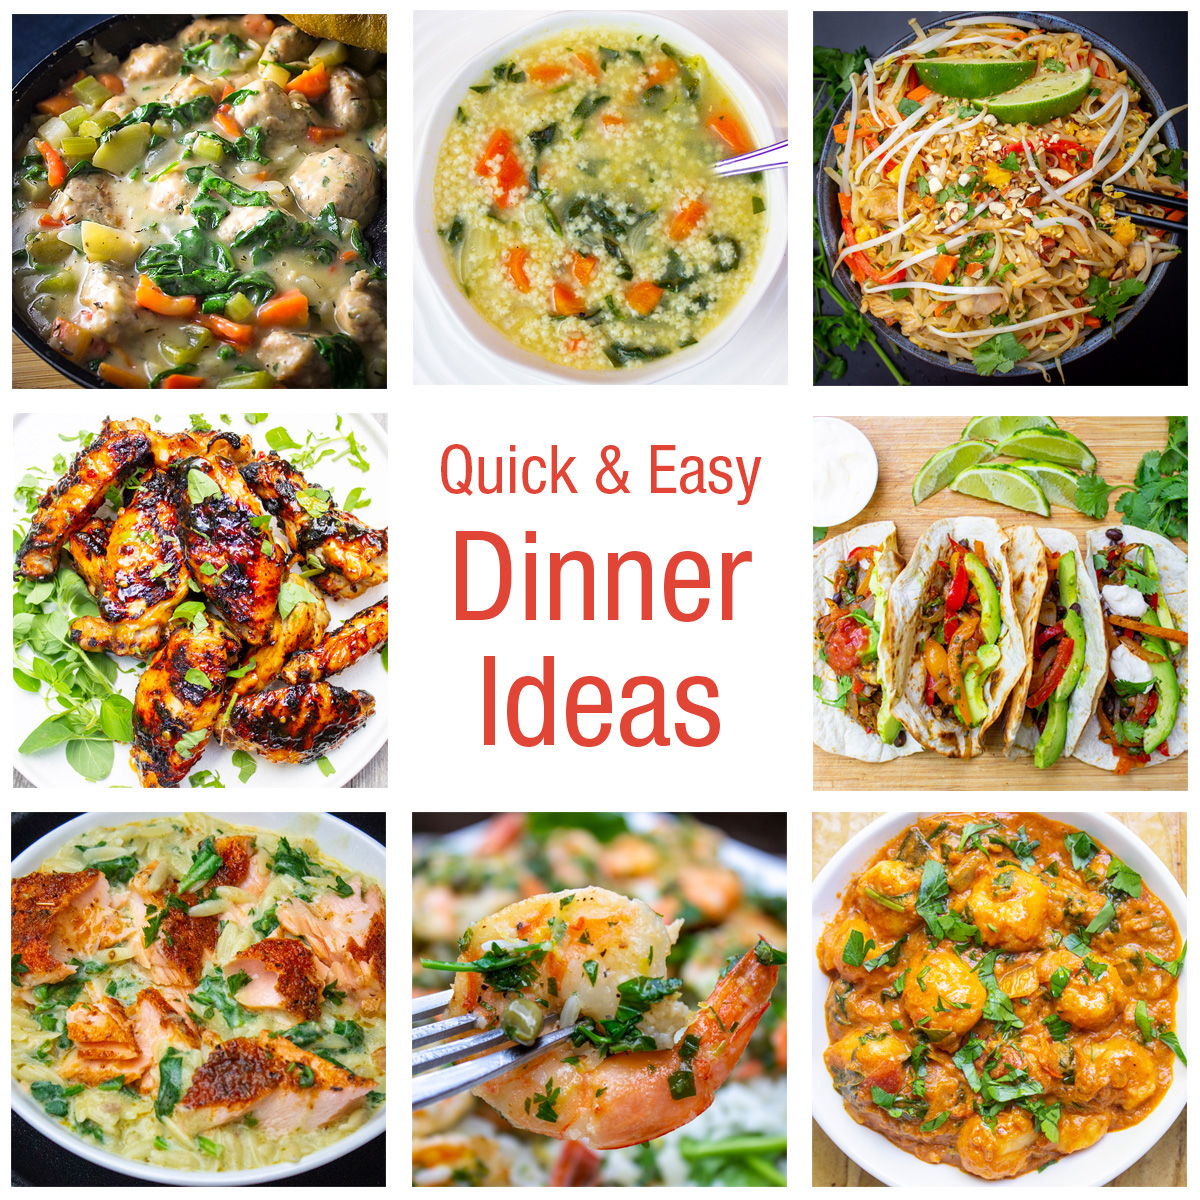 29 Dinner Ideas for Tonight (Quick & Easy)